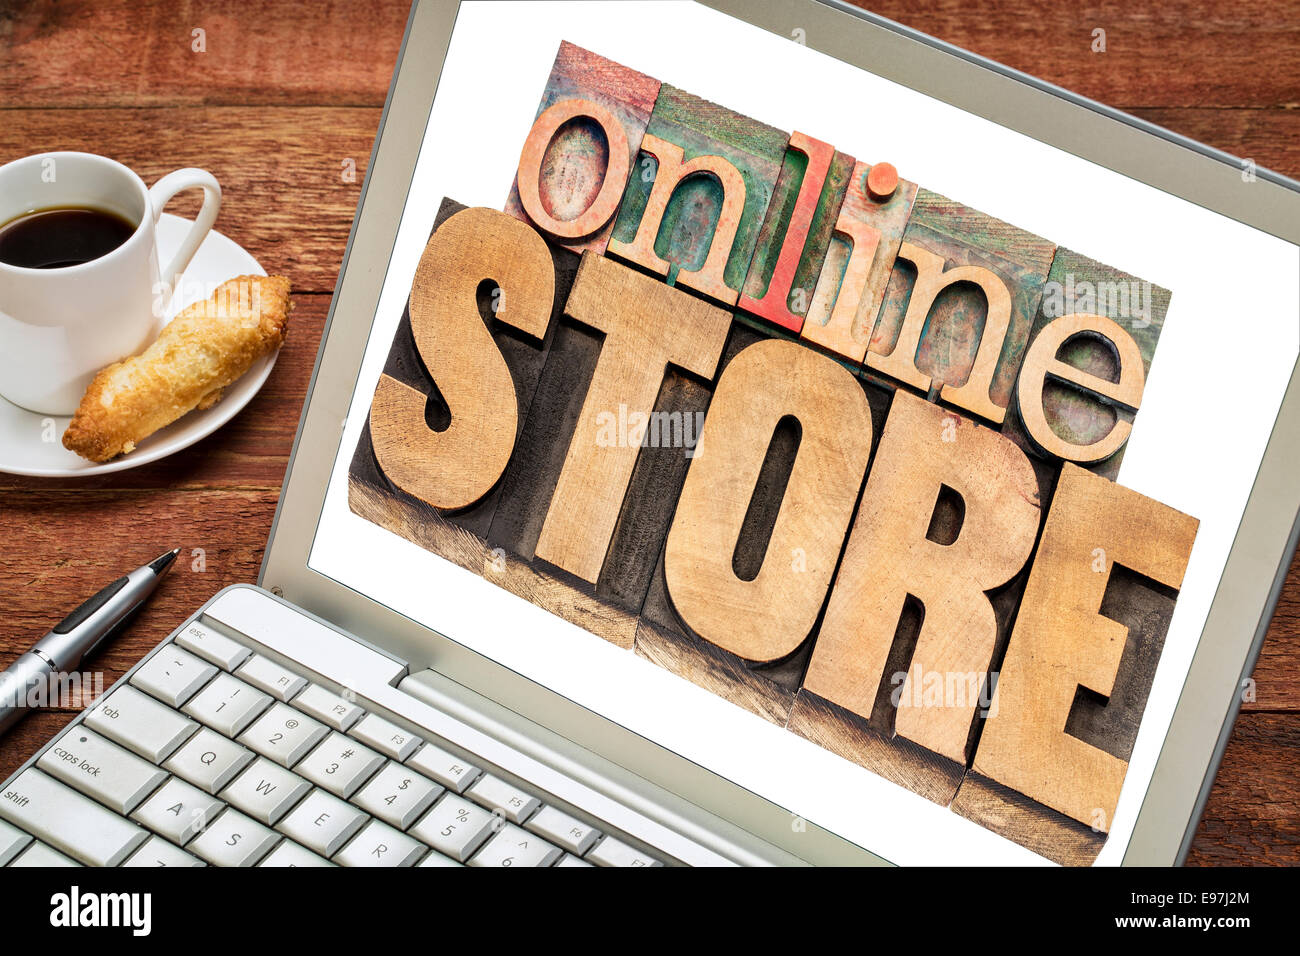 online store - text in letterpress wood type on a laptop screen, cup of coffee Stock Photo